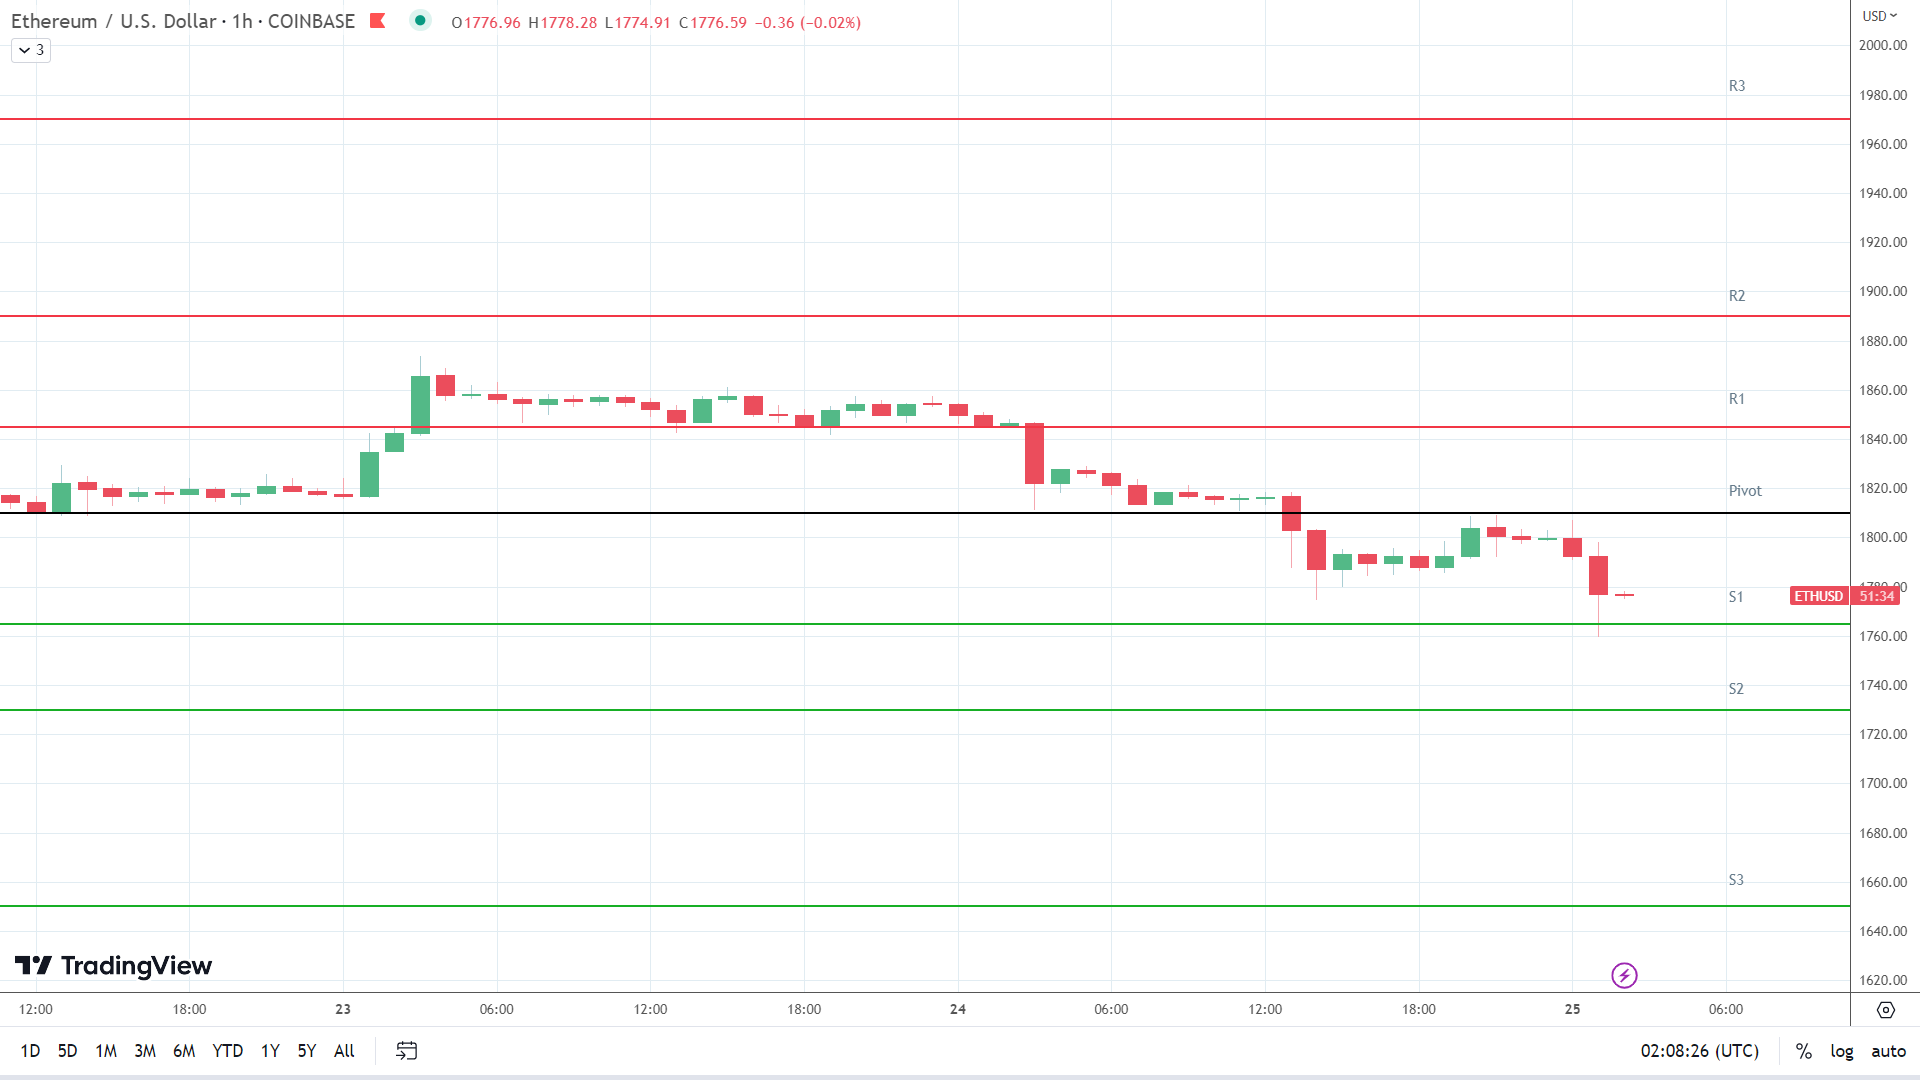 ETH support levels in play early.